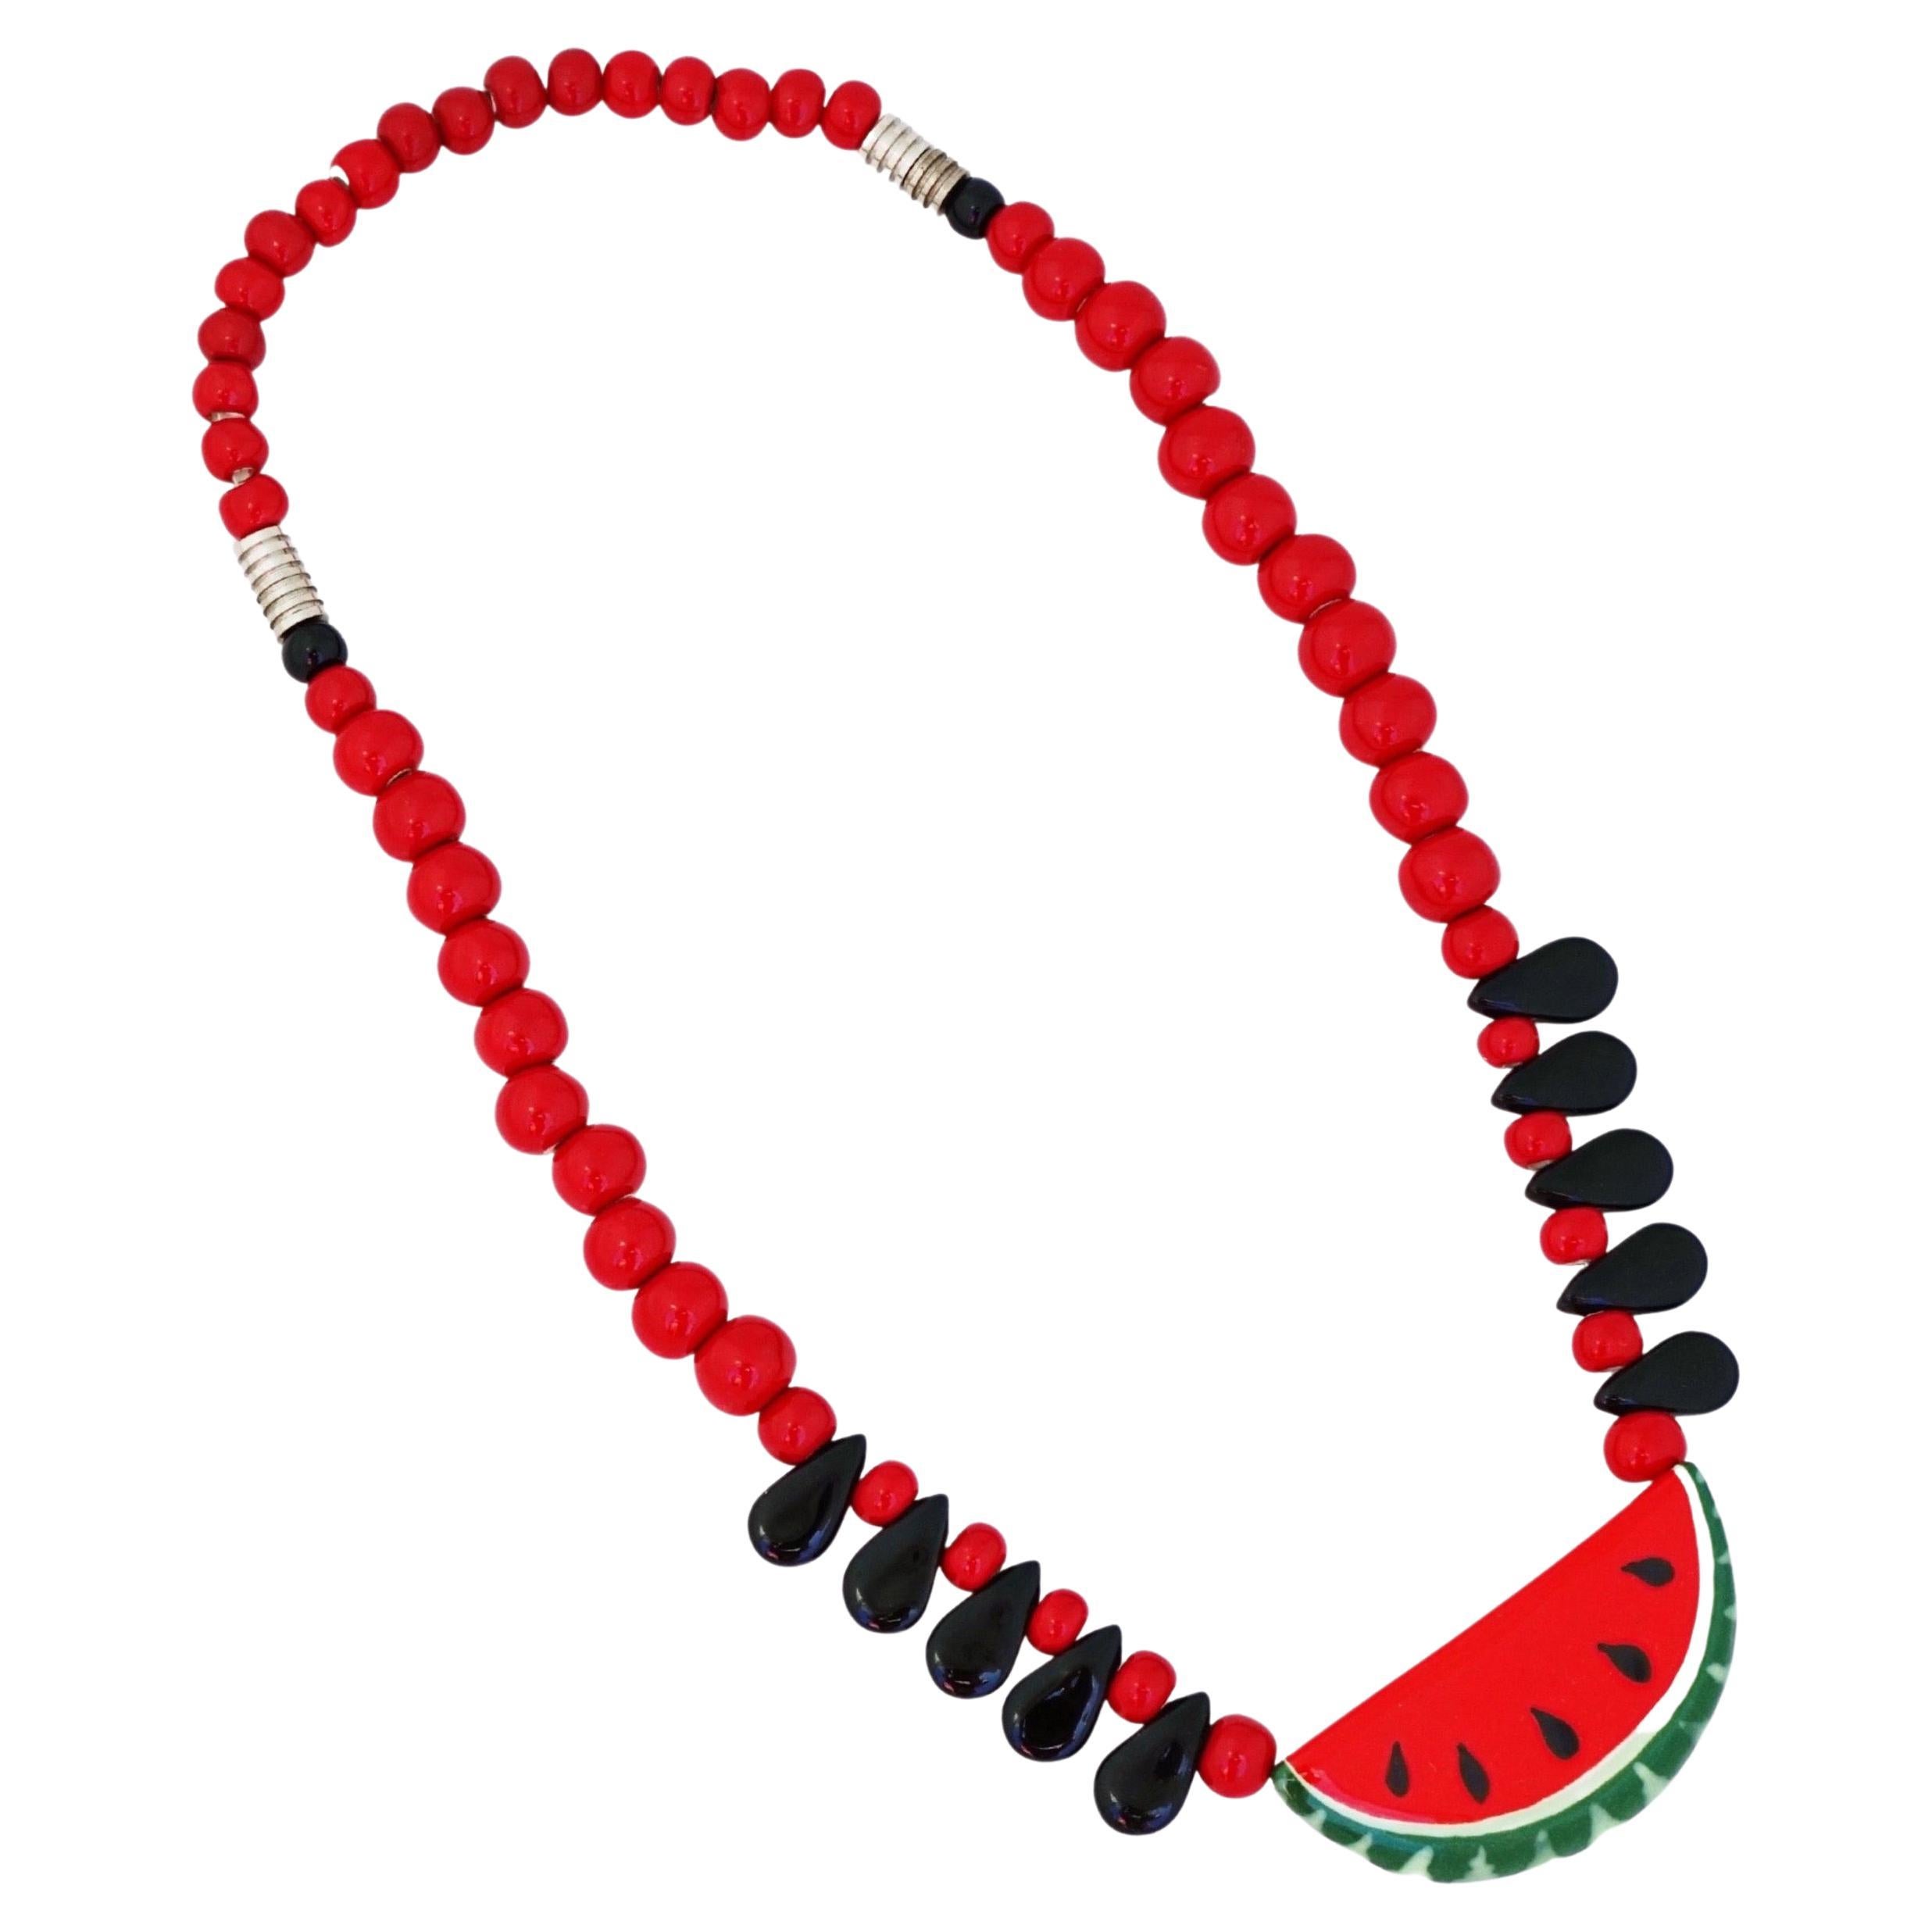 Handmade Ceramic Beaded Watermelon Necklace By Flying Colors, 1980s